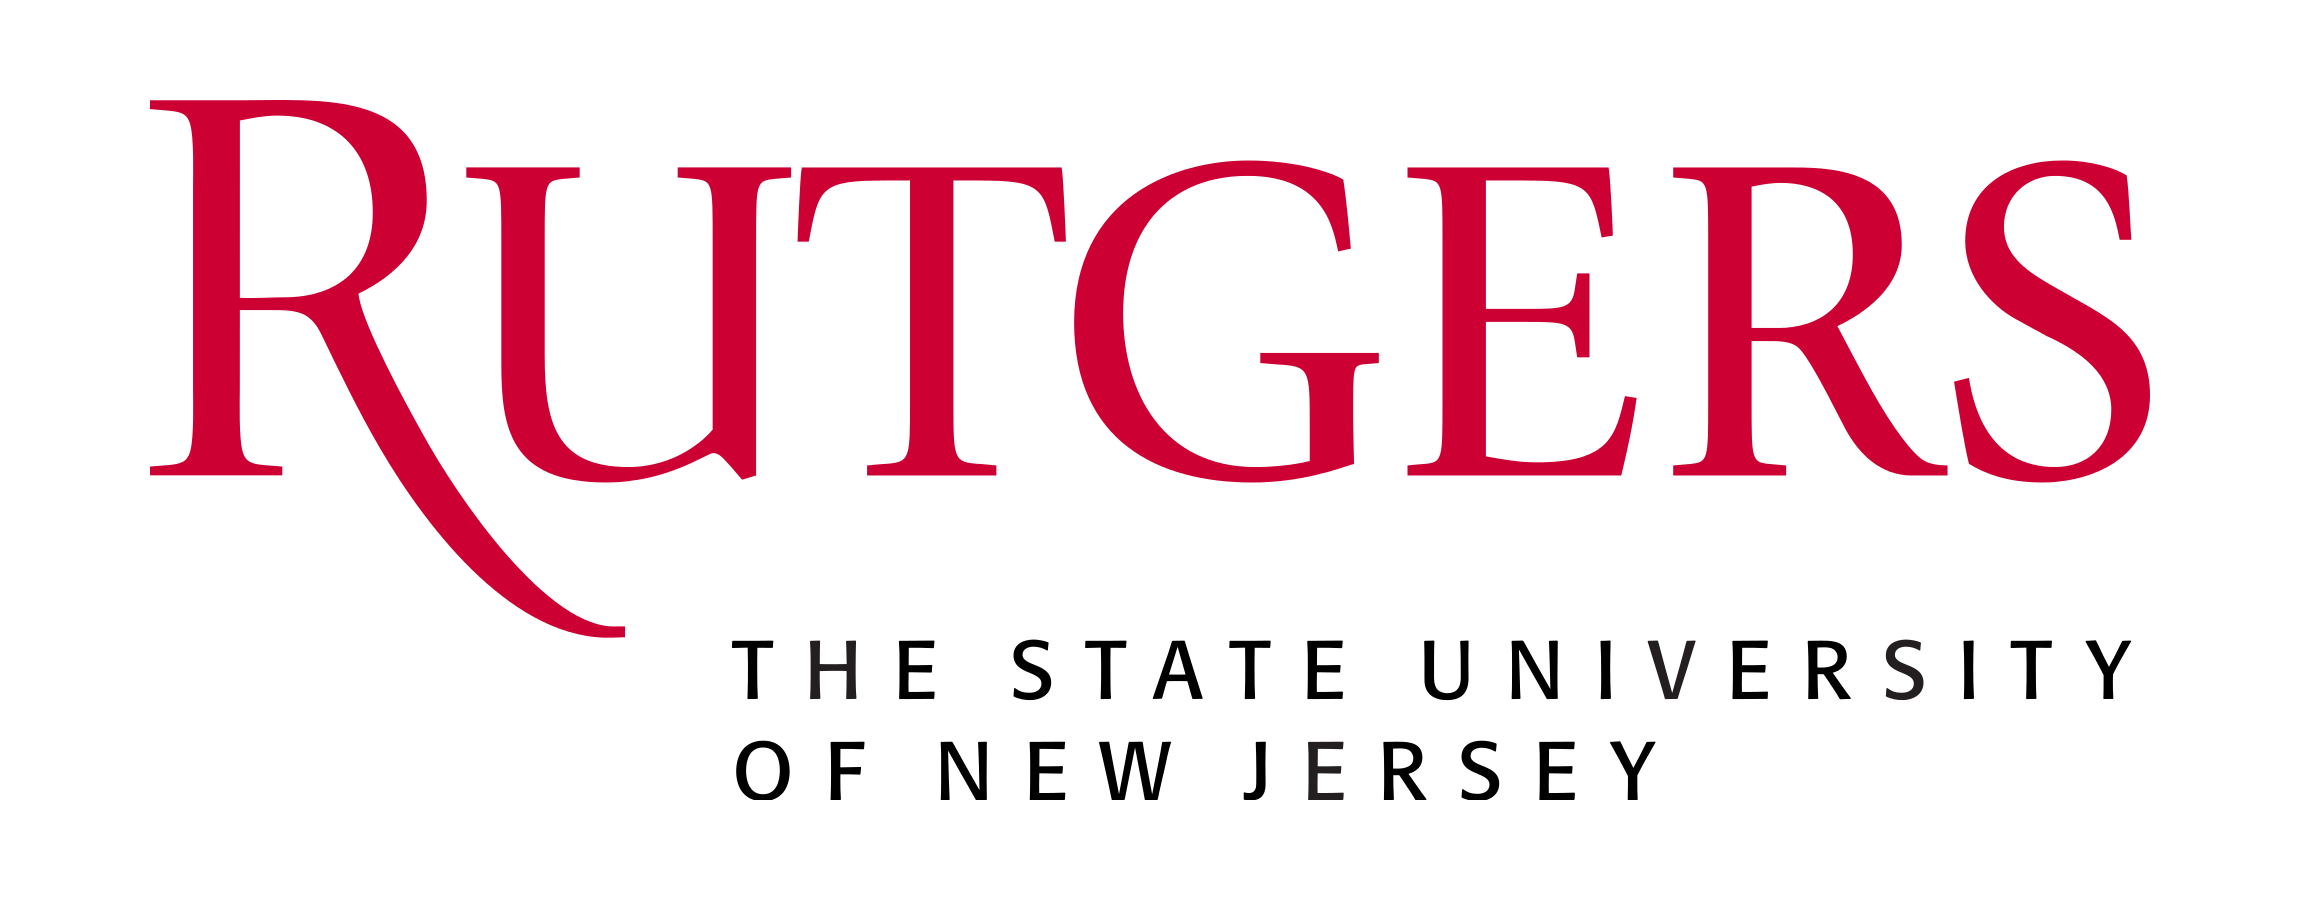 Rutgers (The State University of New Jersey)